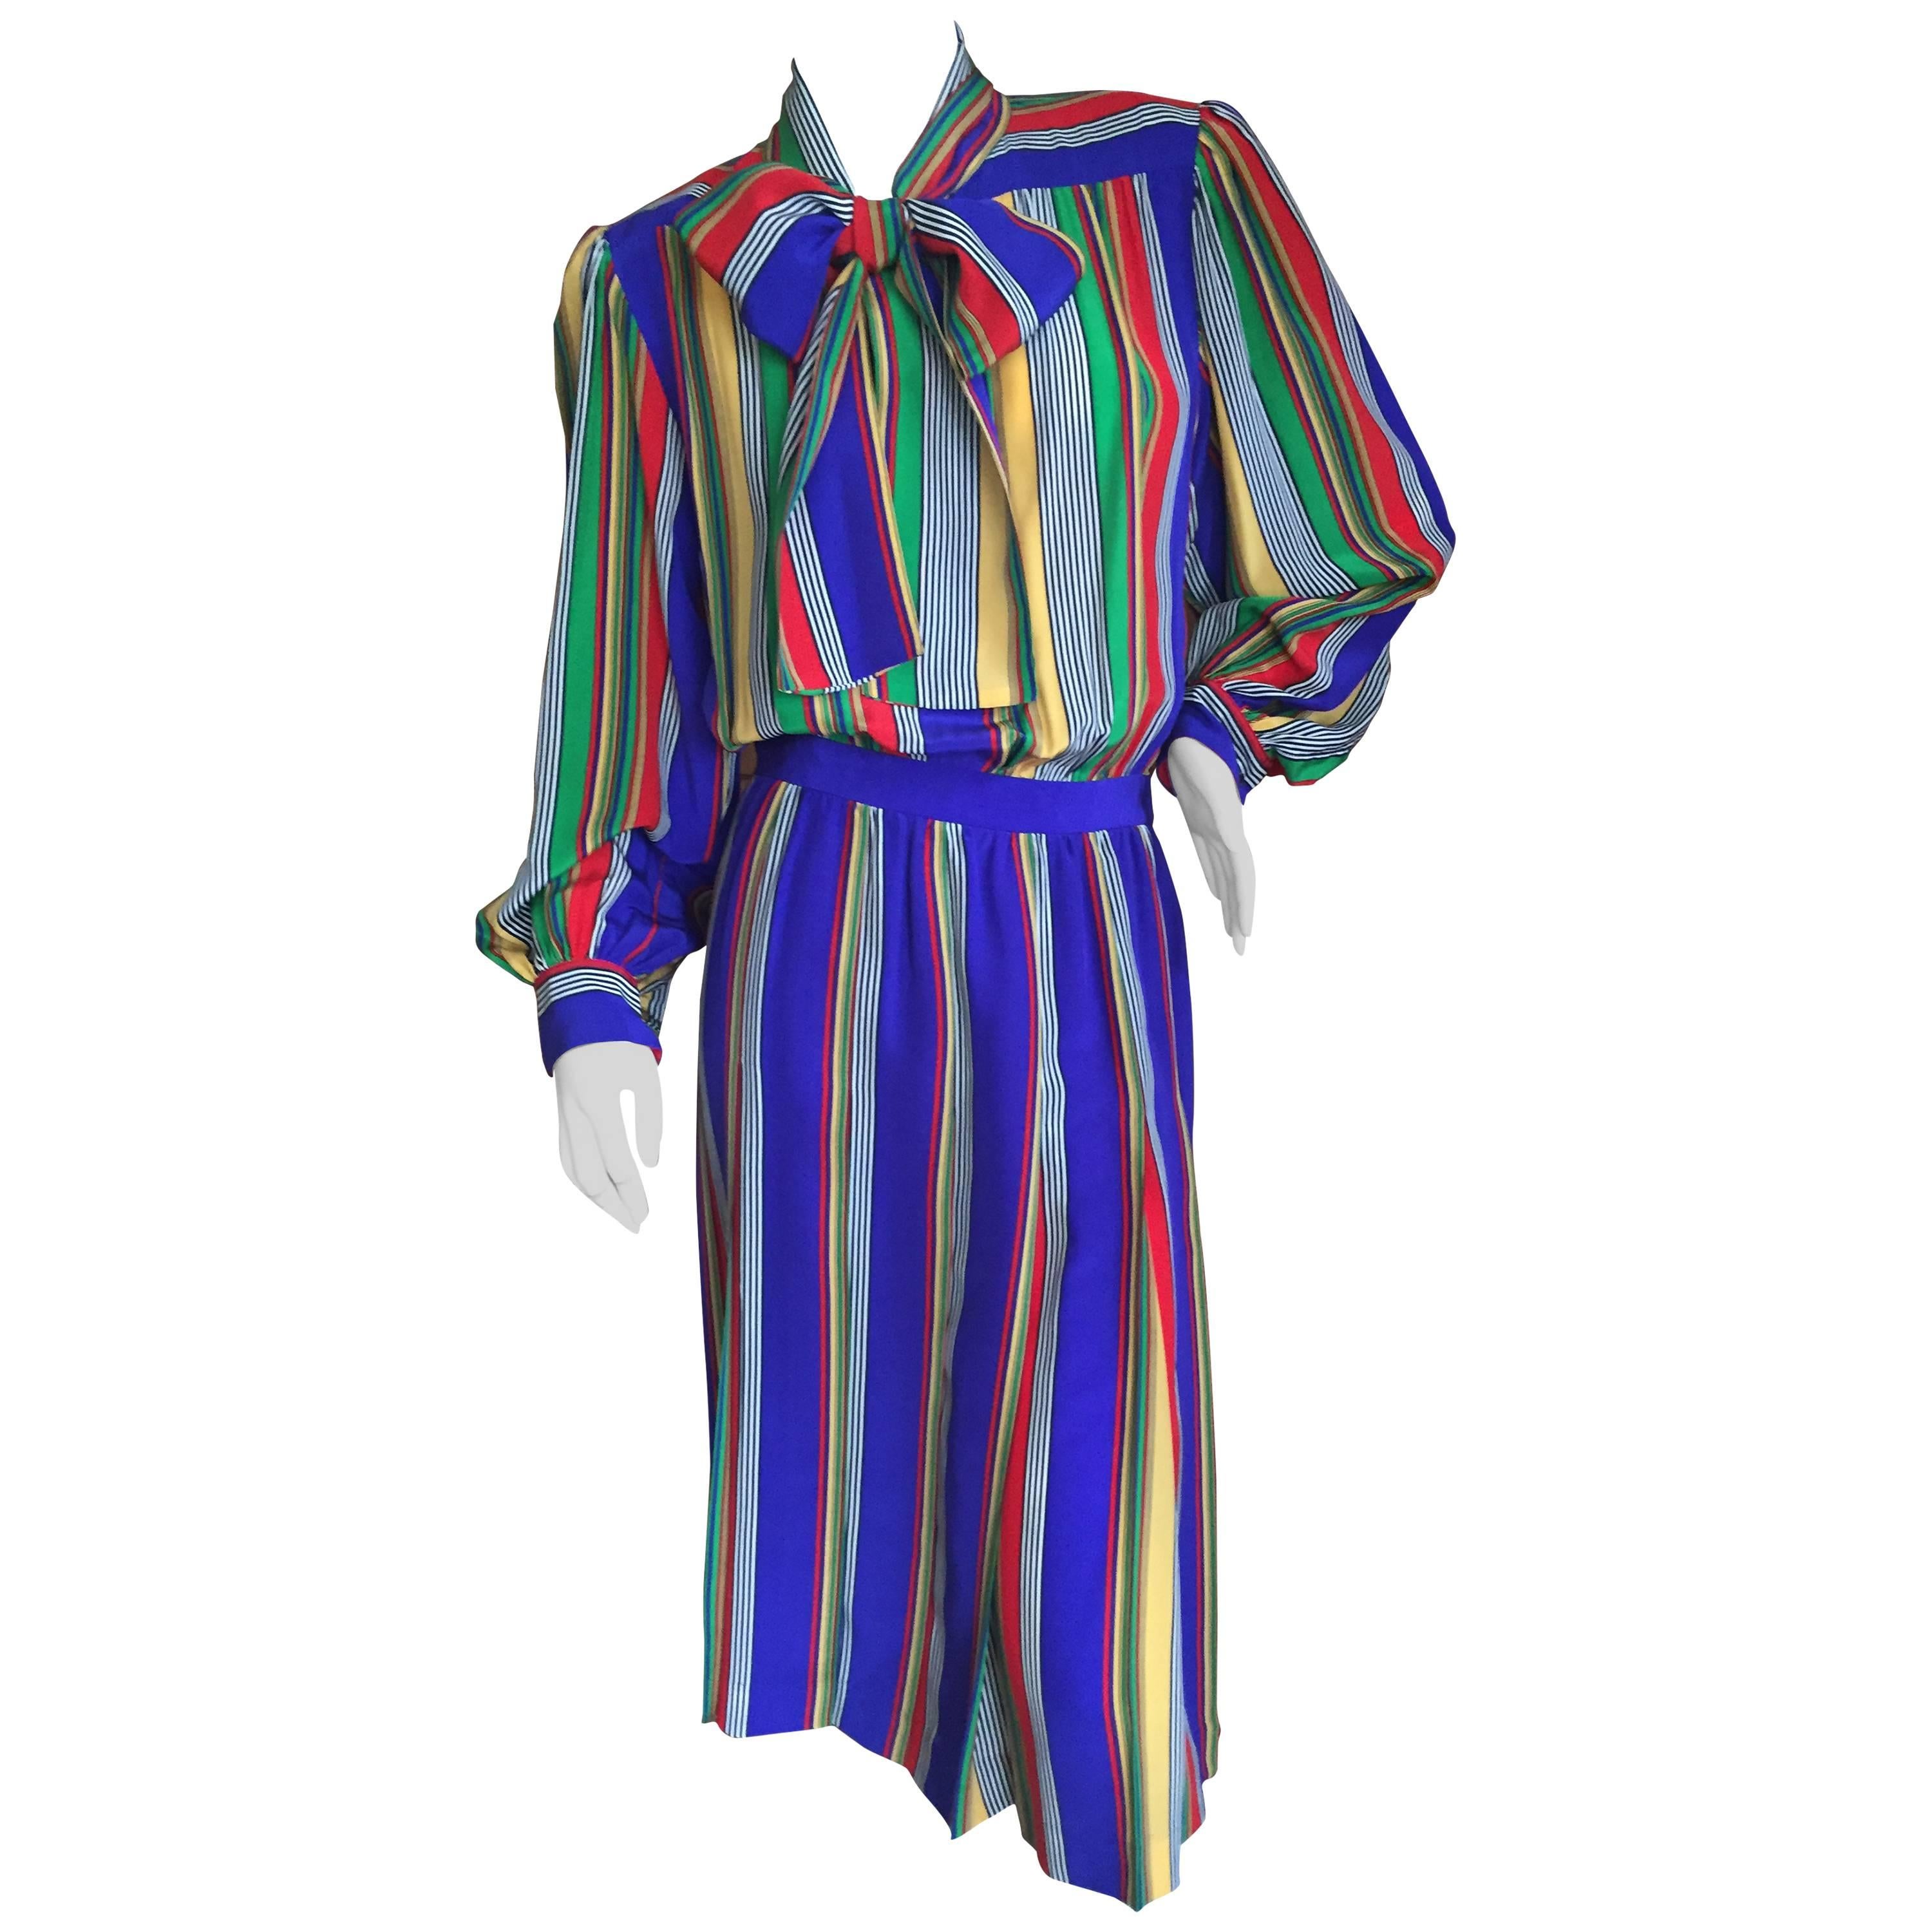 Yves Saint Laurent Rive Gauche 1970's Stripe Silk Day Dress with Bow For Sale